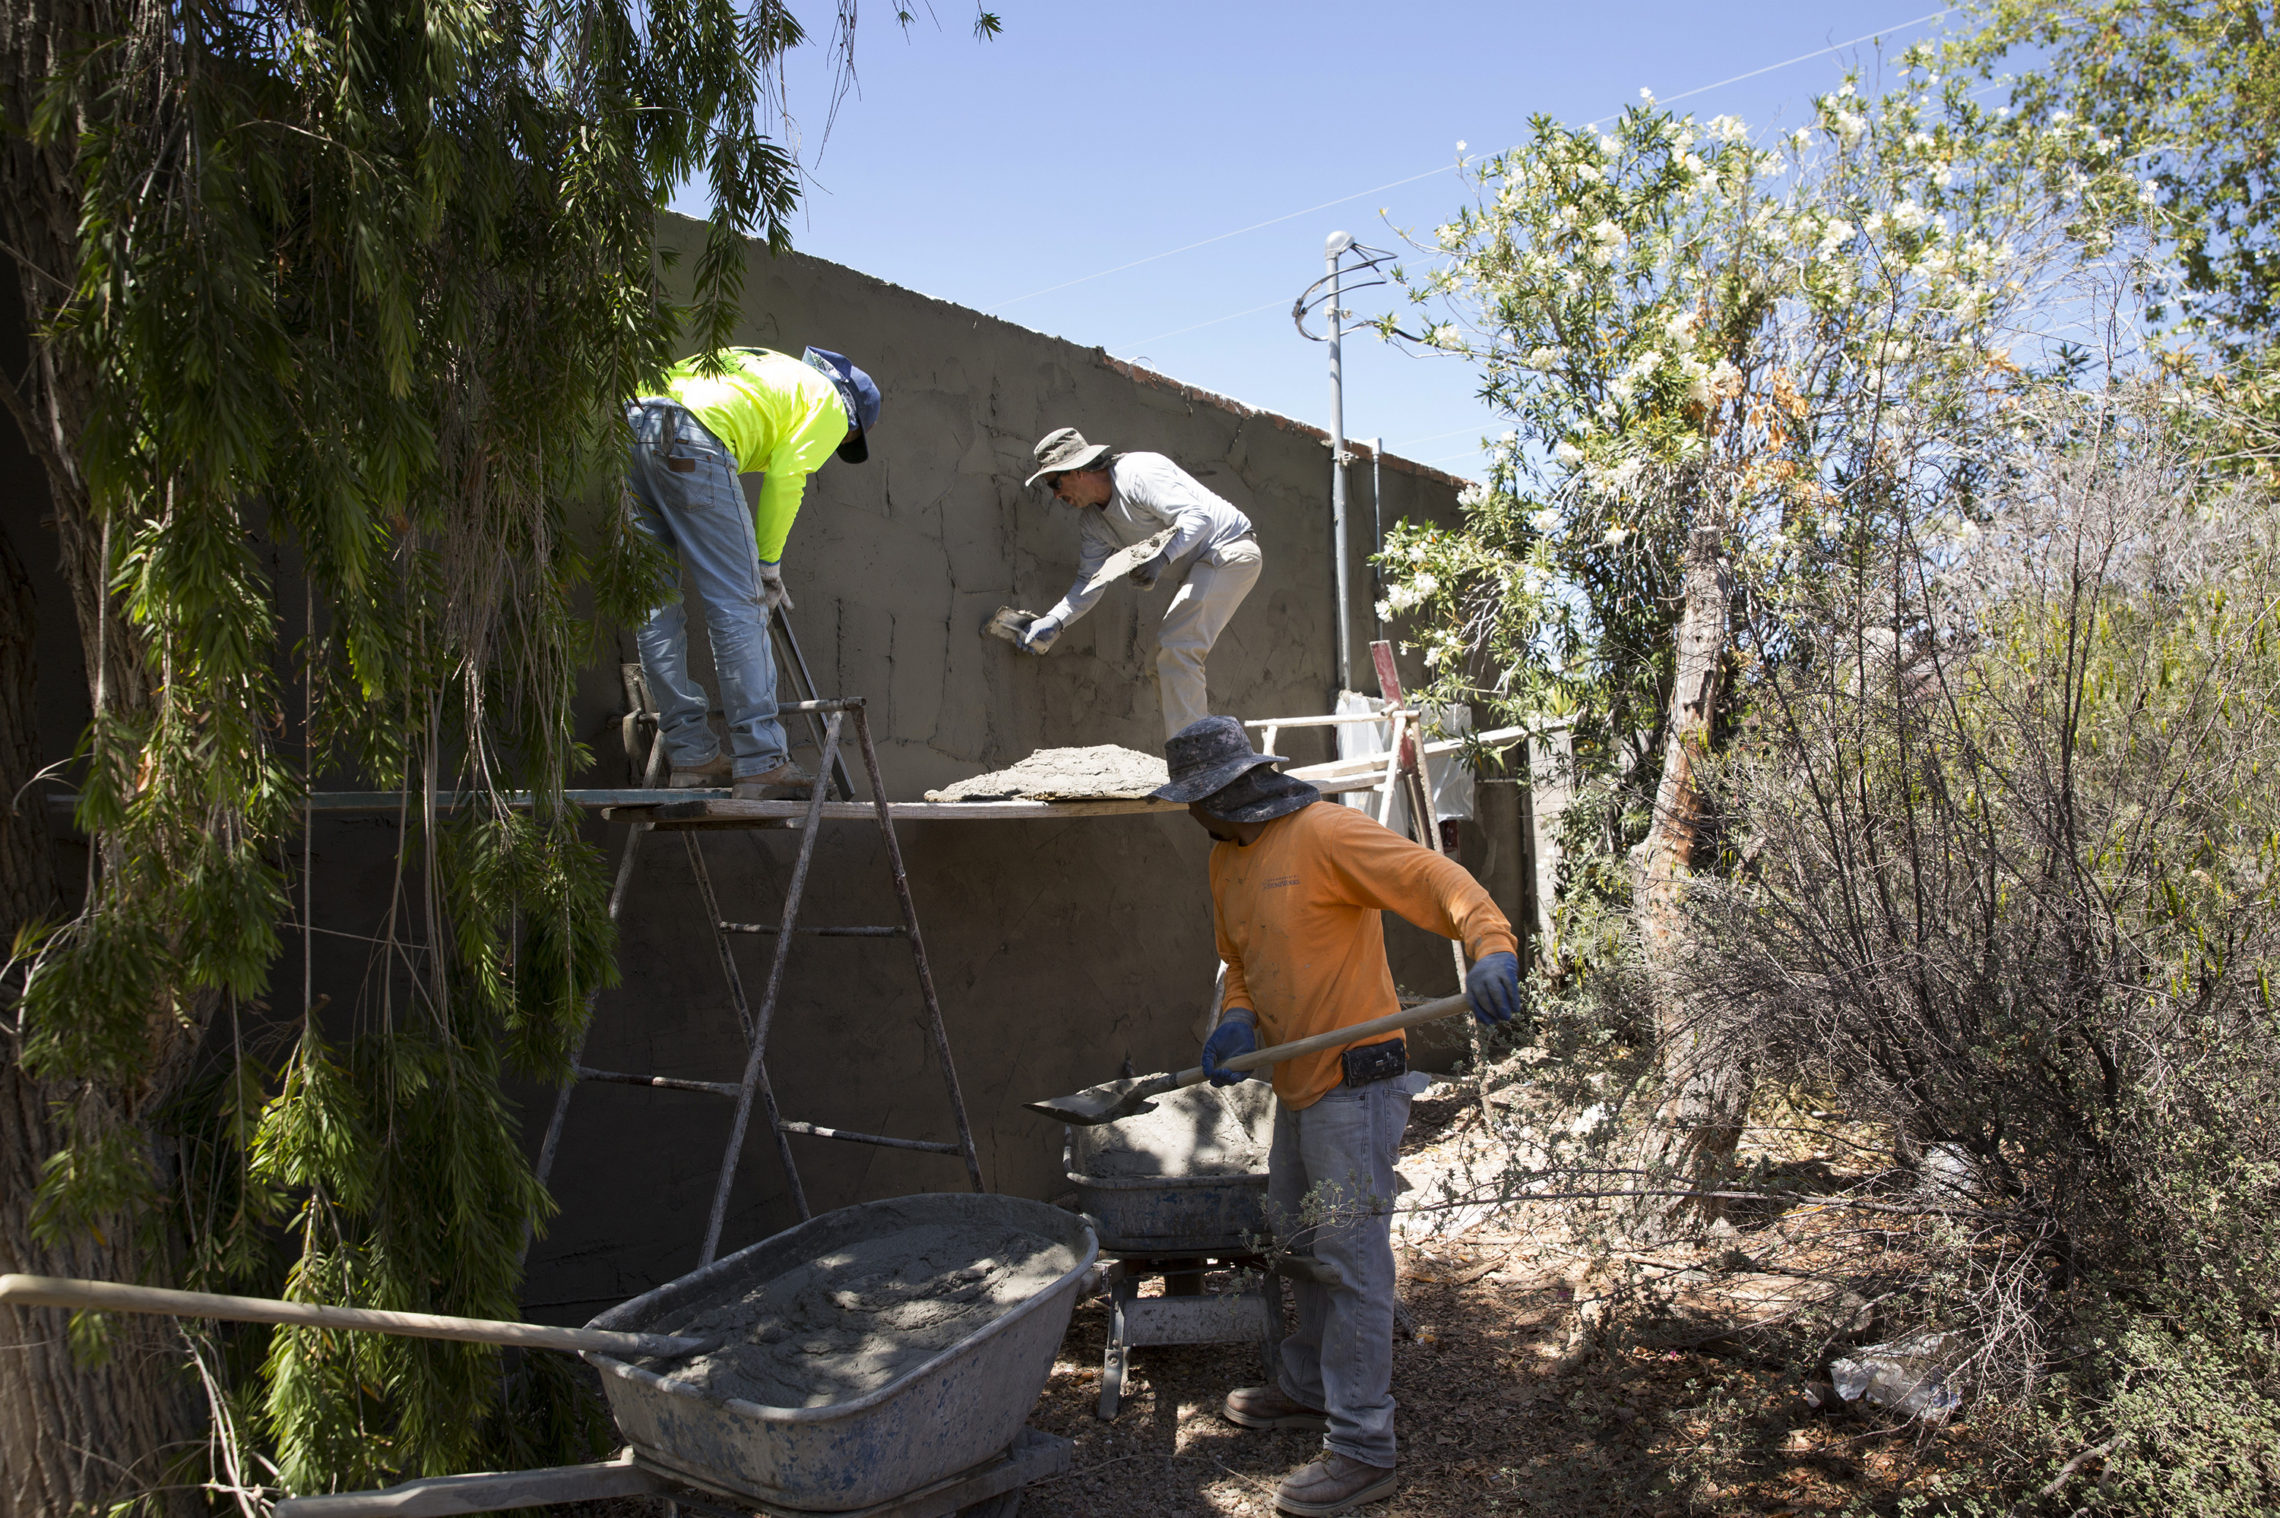 Contractors apply stucco to the exterior of a home being renovated by Rosin and Pickett. Ten years into her career flipping houses, Rosin's operation is much more streamlined and professional. Still, it's harder to make money. CREDIT: CAITLYN O'HARA